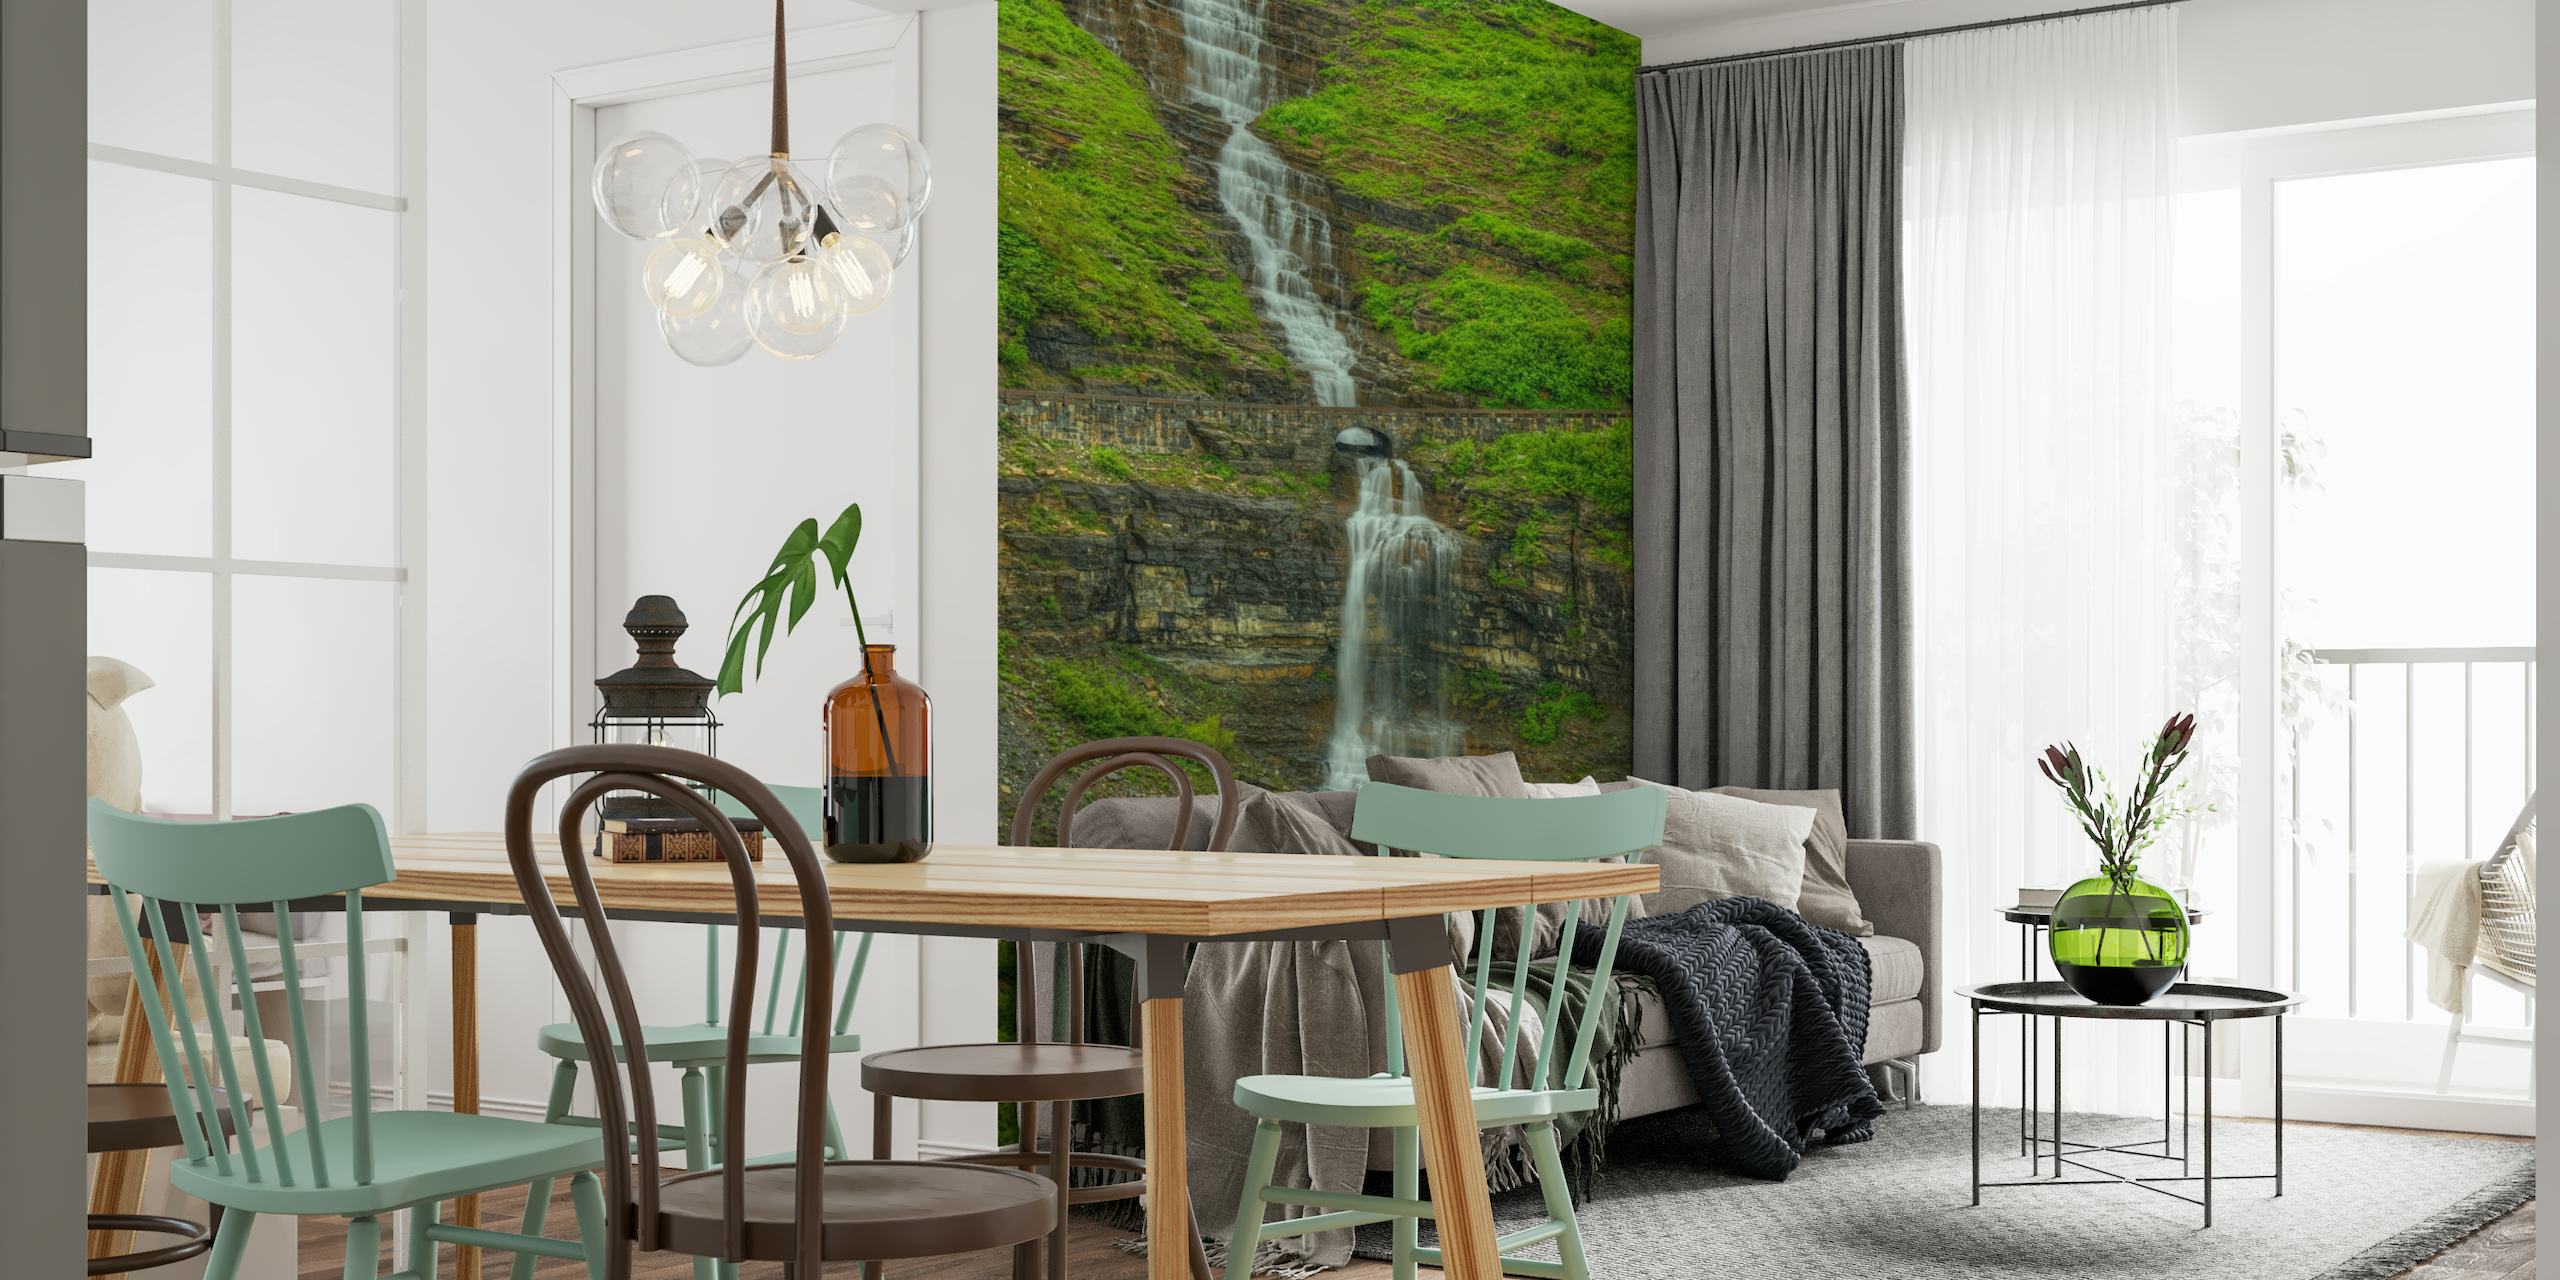 Wall mural of a cascading waterfall with greenery